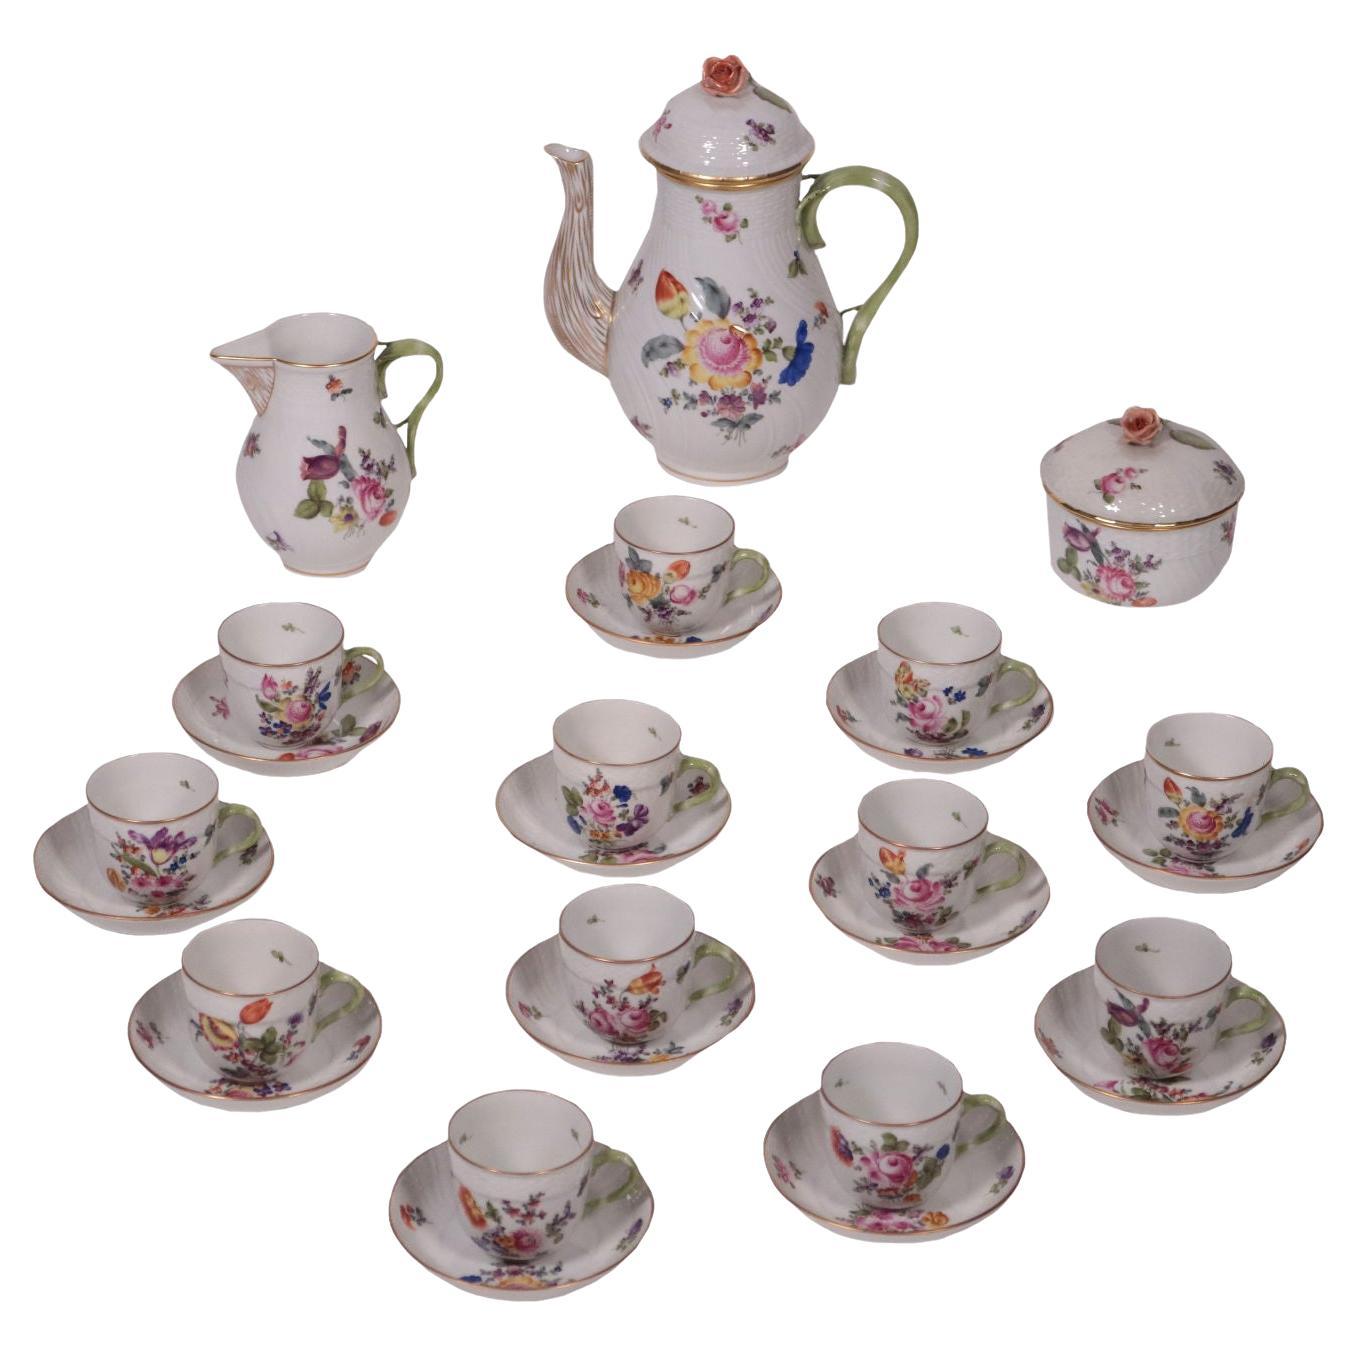 Herend Hungary Coffee Set Porcelain, 20th Century